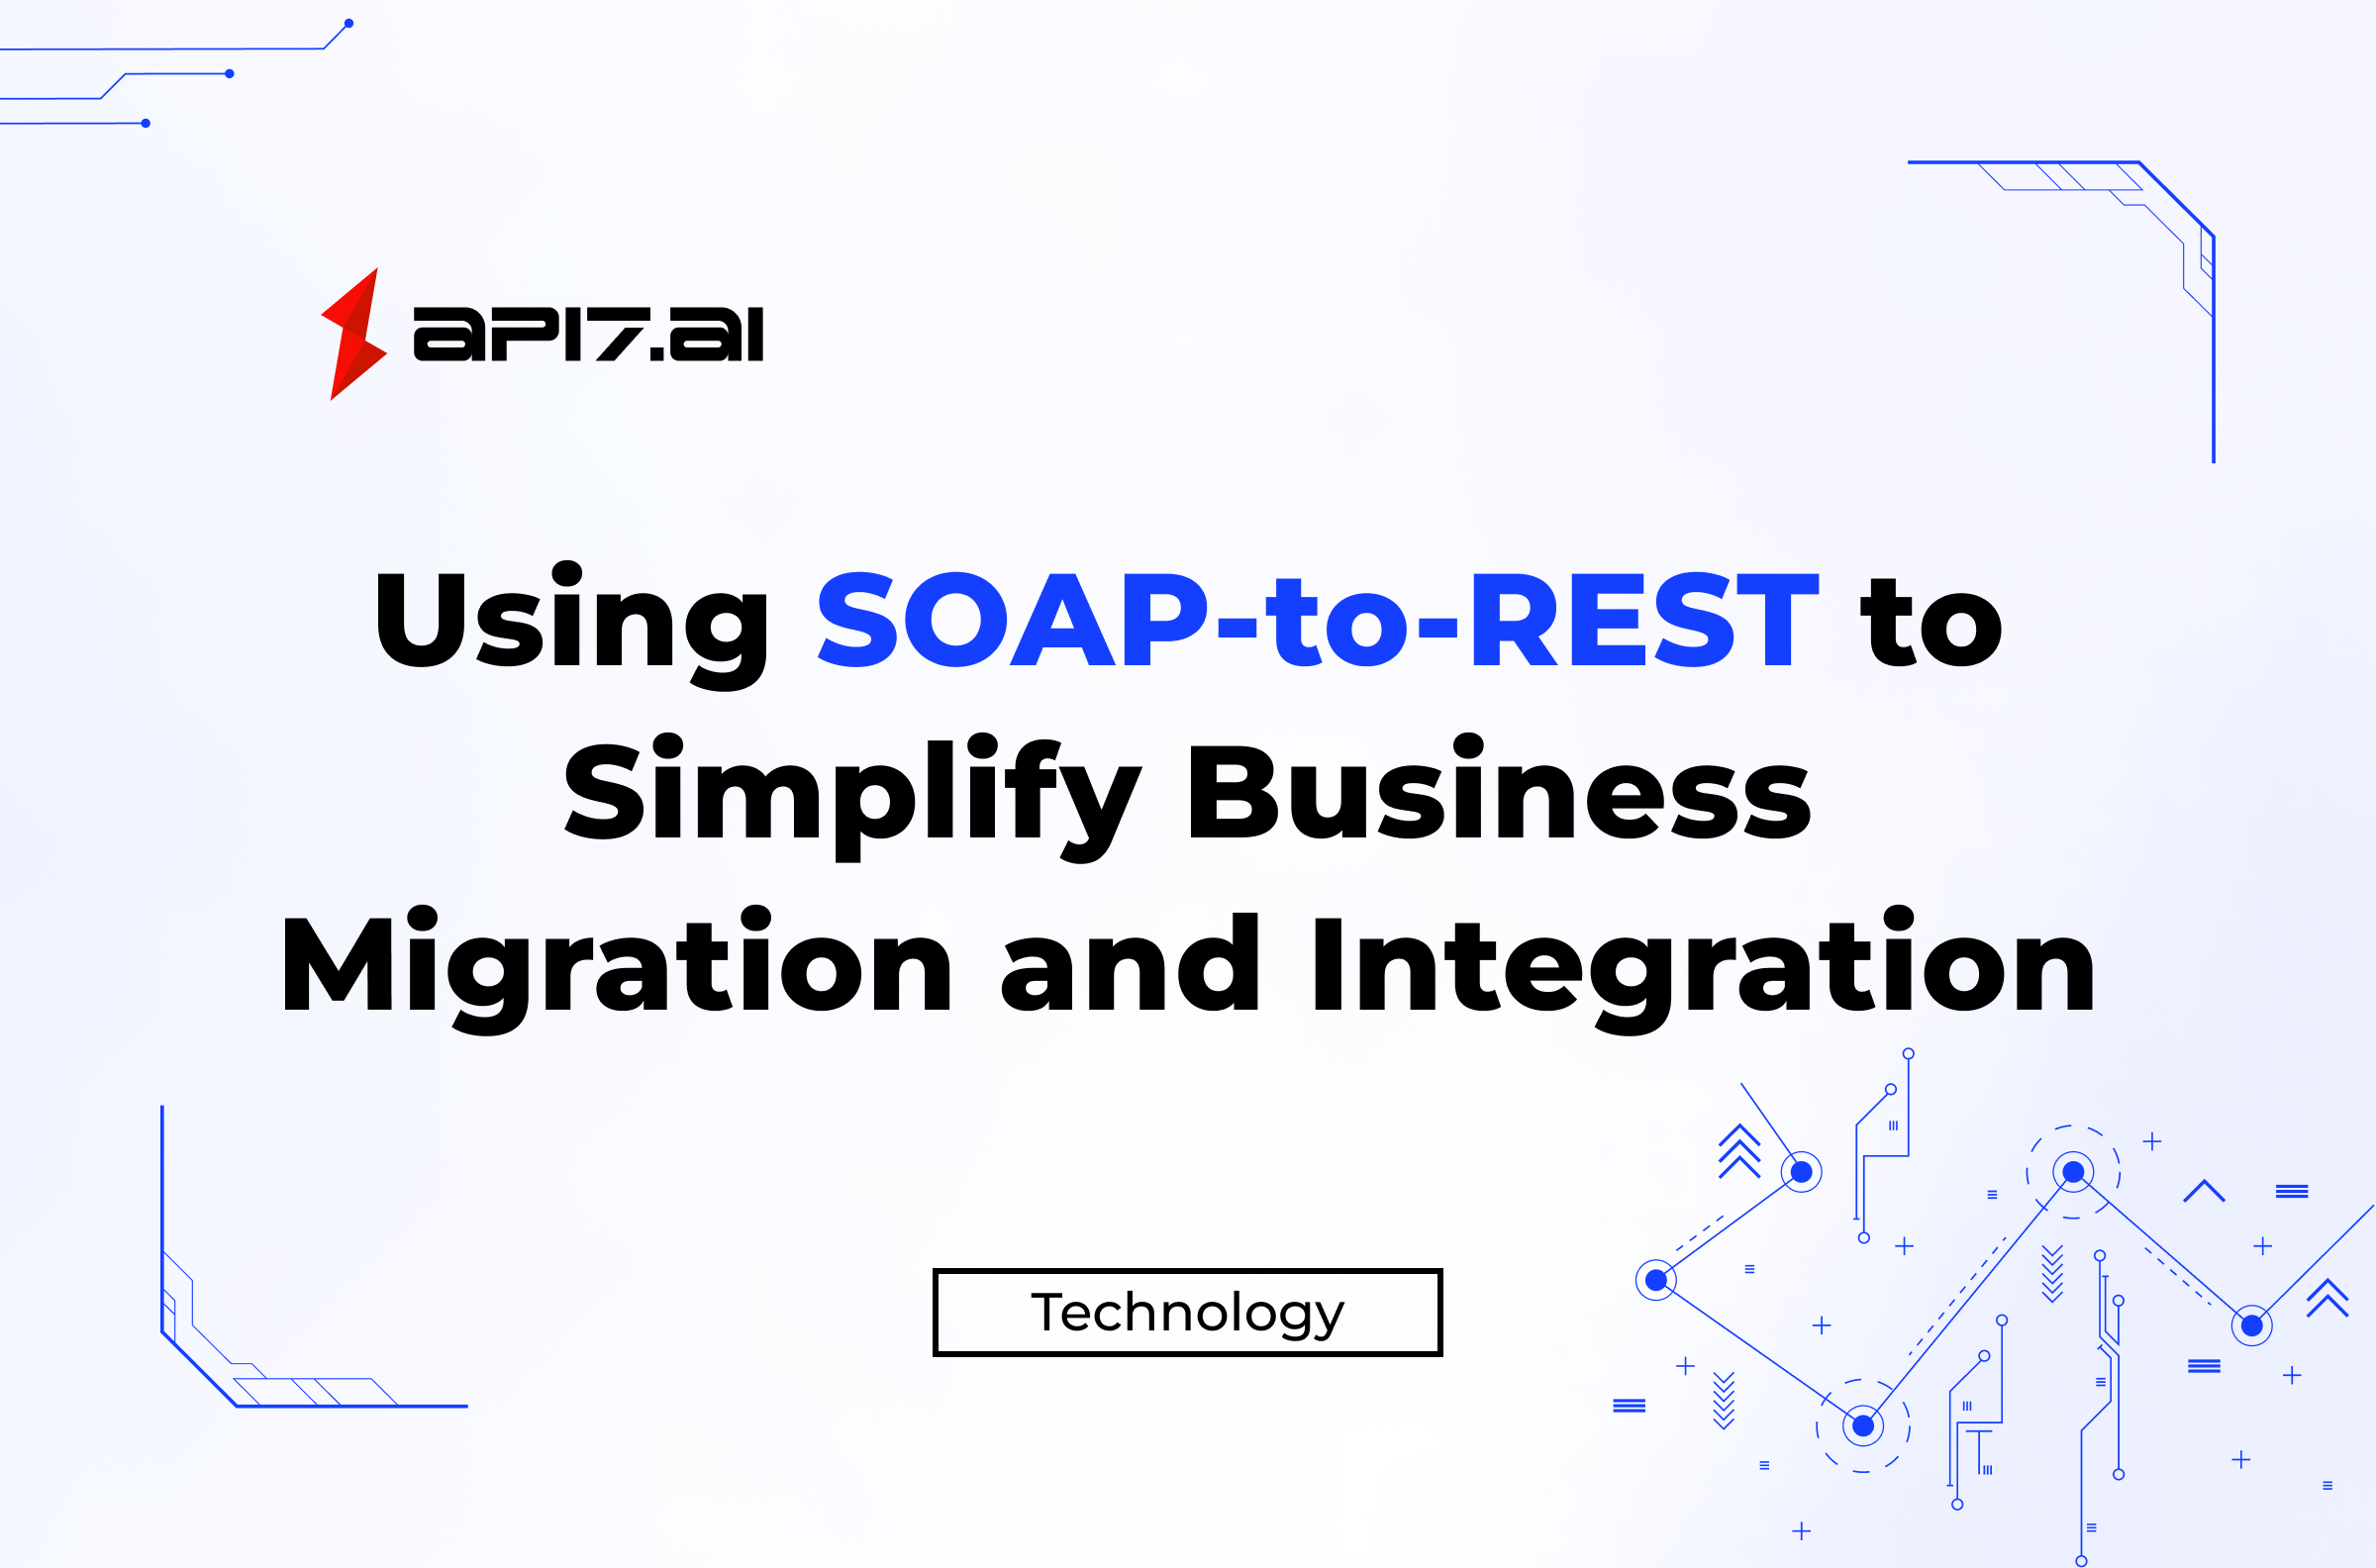 Using SOAP-to-REST to Simplify Migration and Integration